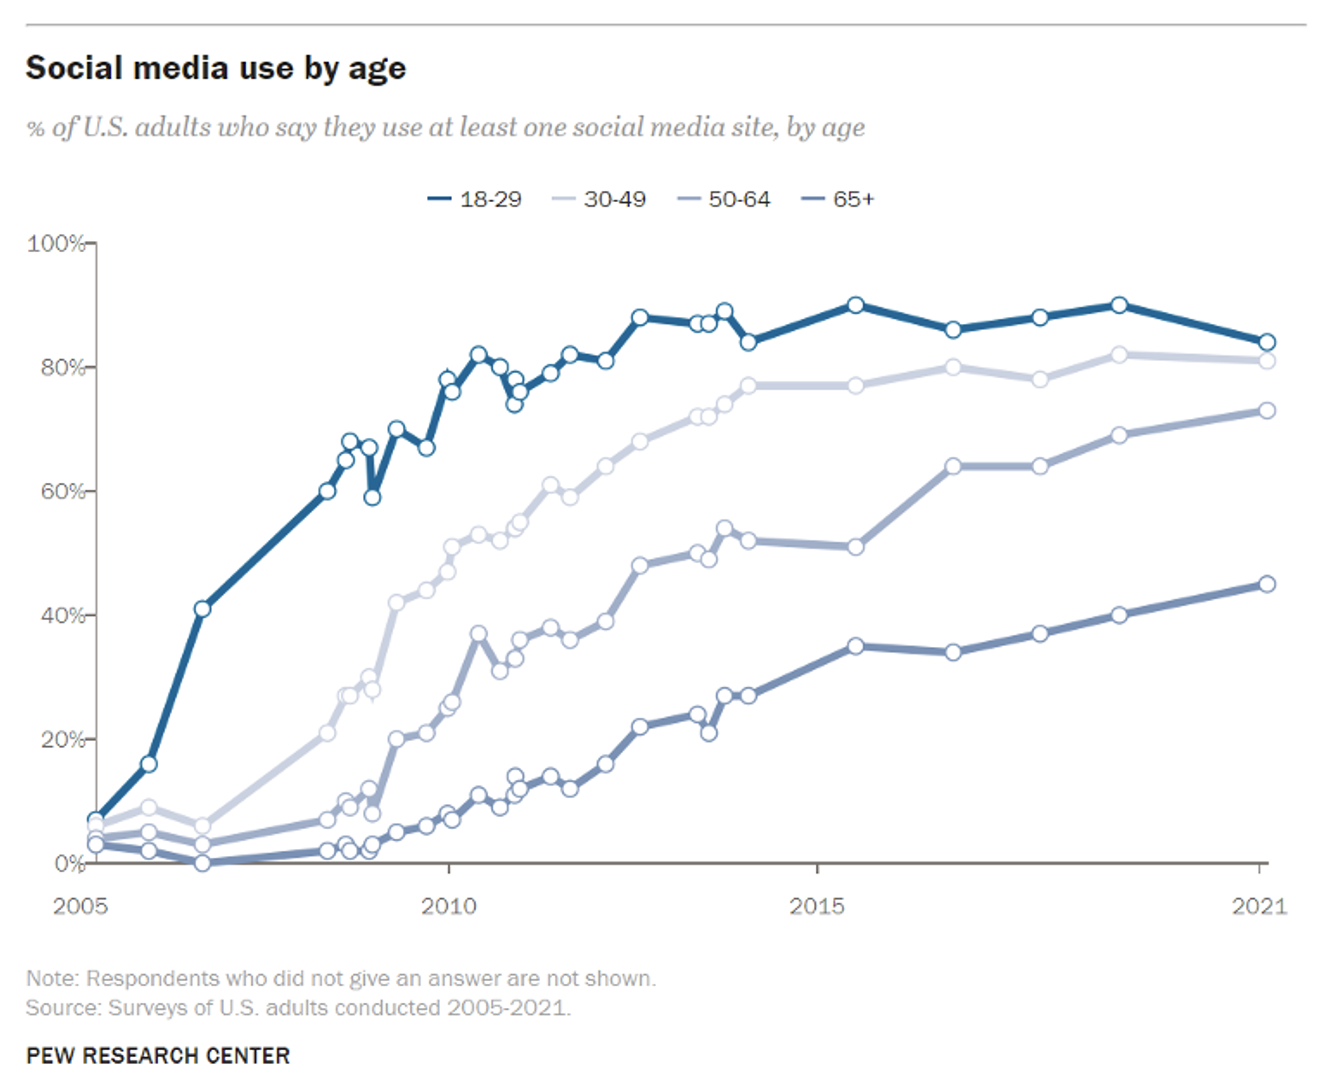 A line chart illustrating the usage of social media by age. The Y-axis represents the percentage of U.S. adults who report using at least one social media site, while the X-axis represents the years from 2005 to 2021. Among the age groups of 18-29, 30-49, 50-64, and 65 and above, individuals in the 18-29 age group exhibit the highest usage.